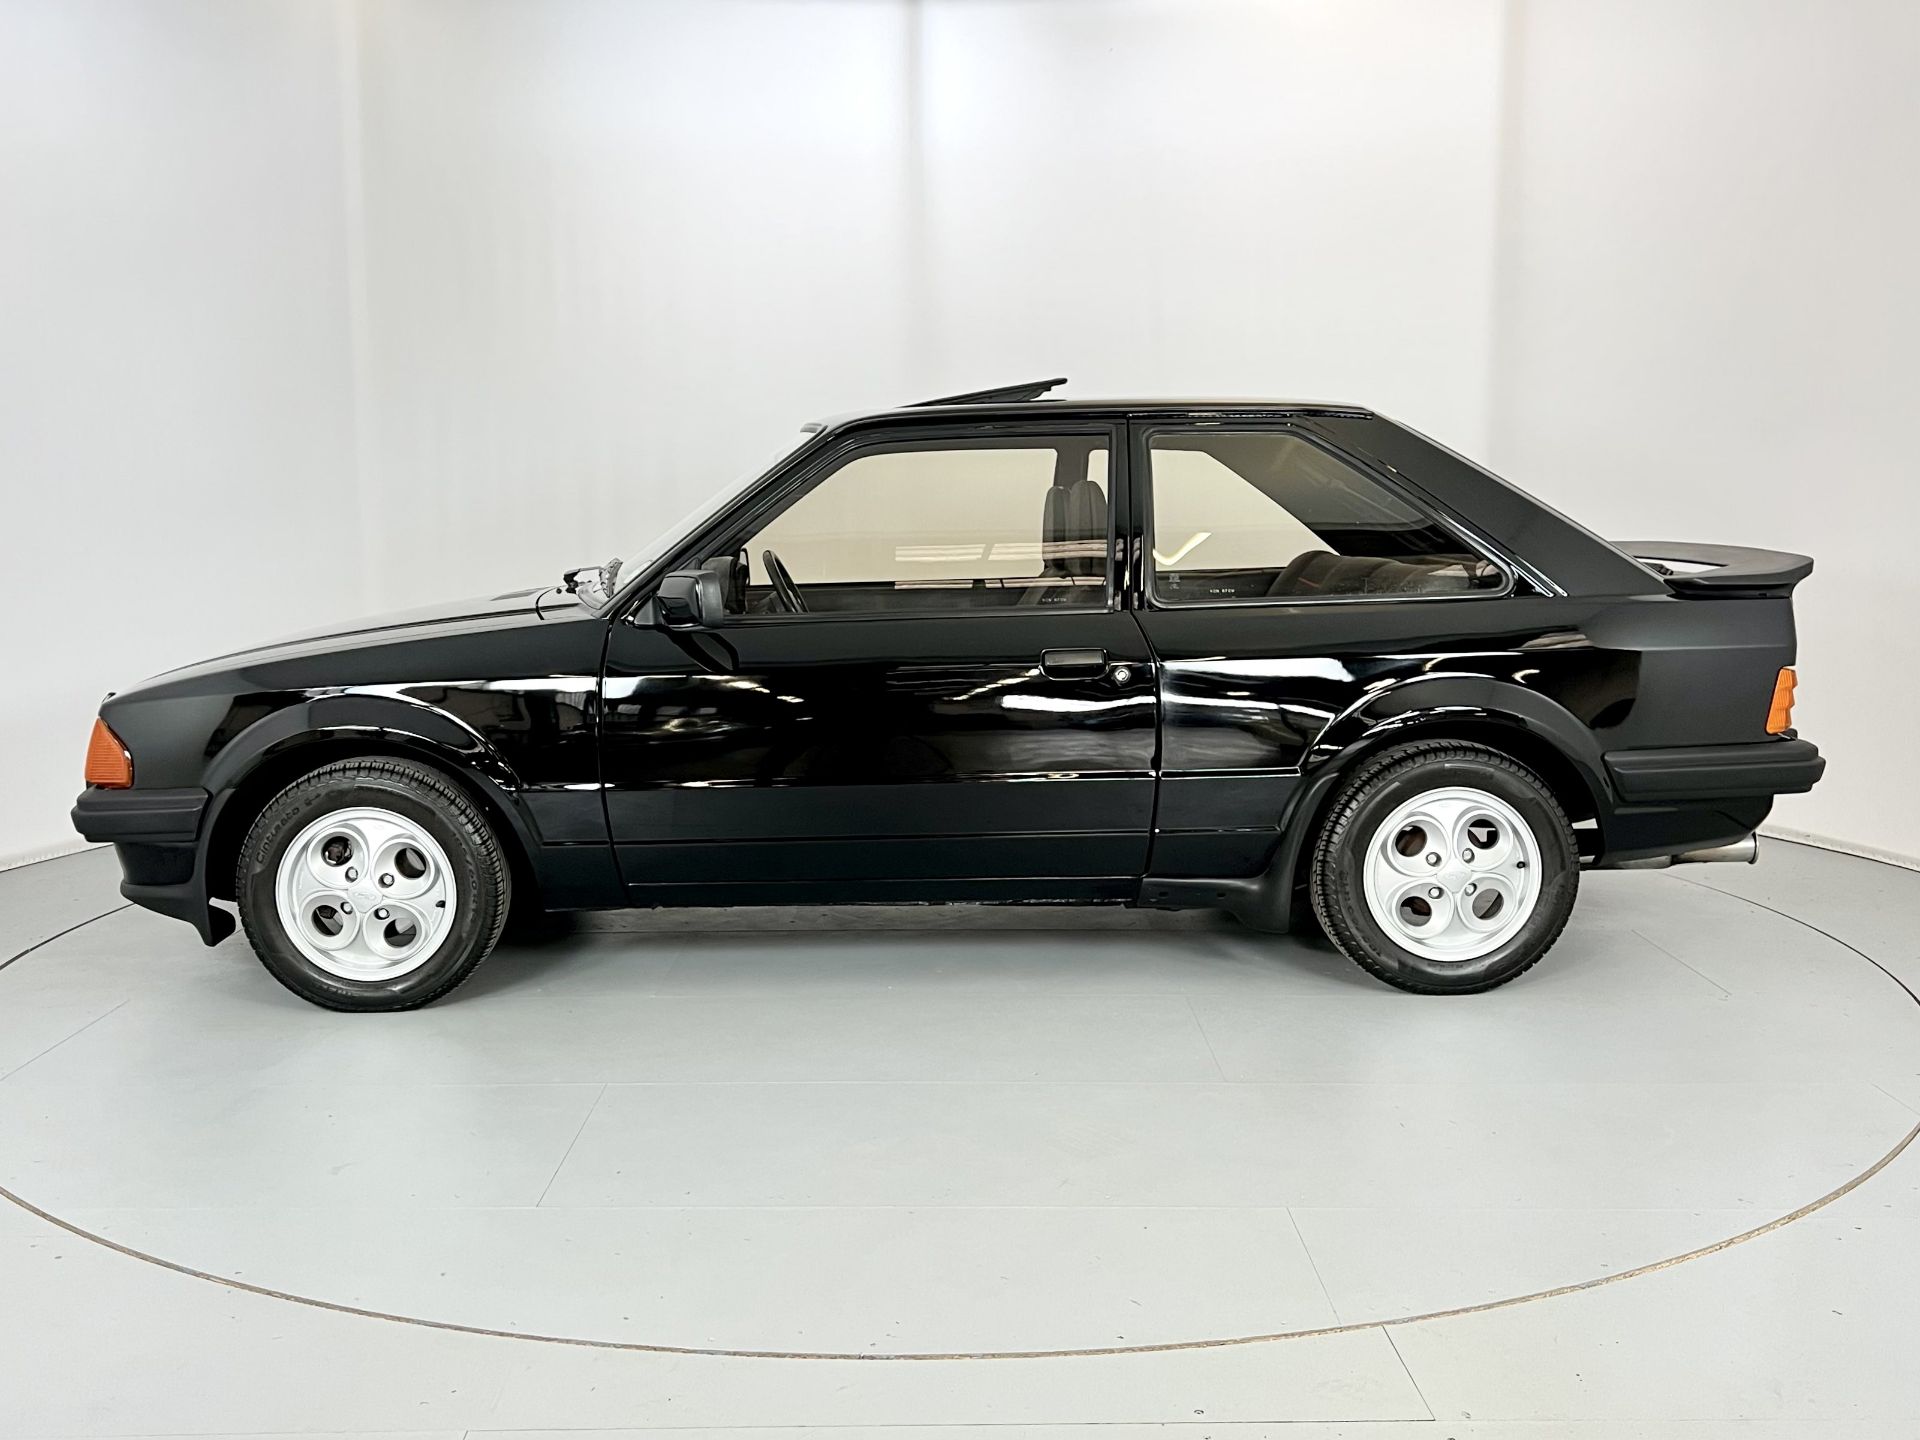 Ford Escot XR3 SVO - Image 5 of 31